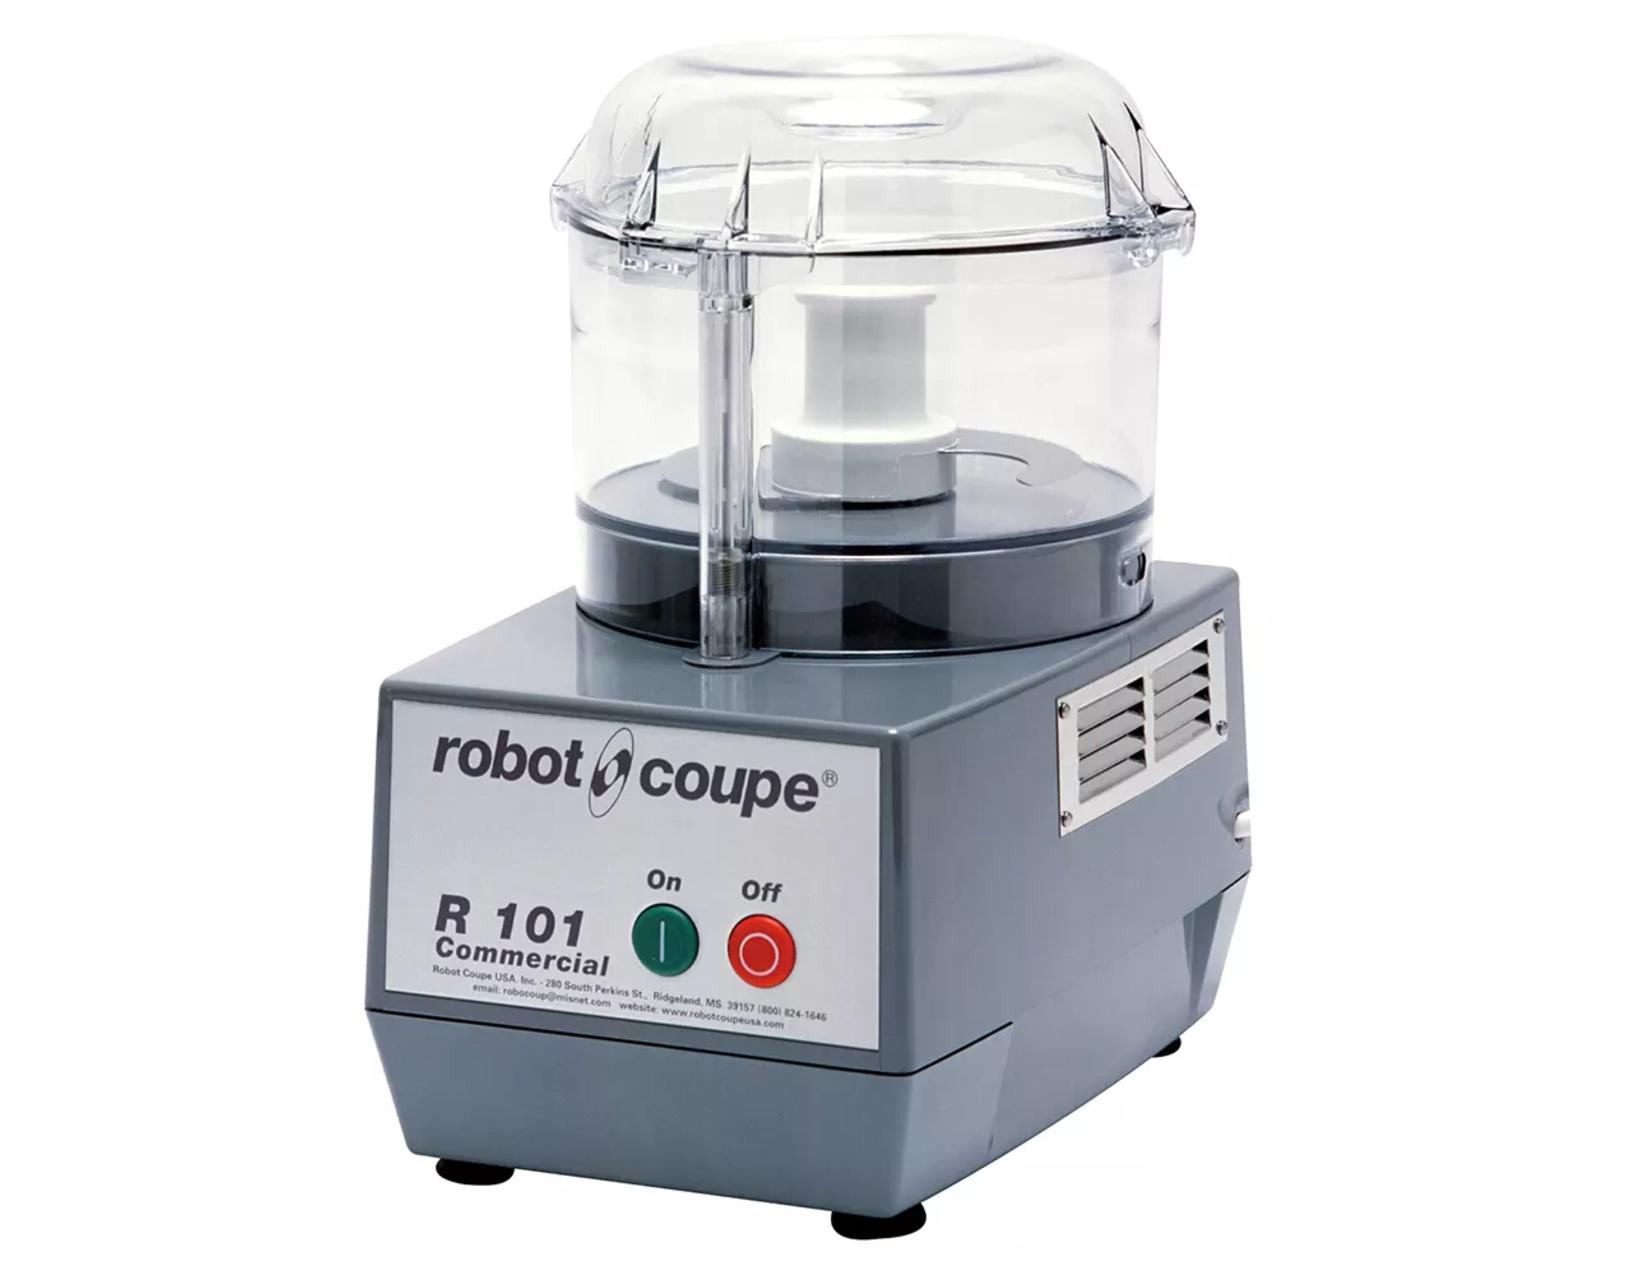 Robot Coupe R B CLR Commercial Food Processor with 2.5-Quart Clear Polycarbonate Bowl, 120-Volts - Plant Based Pros